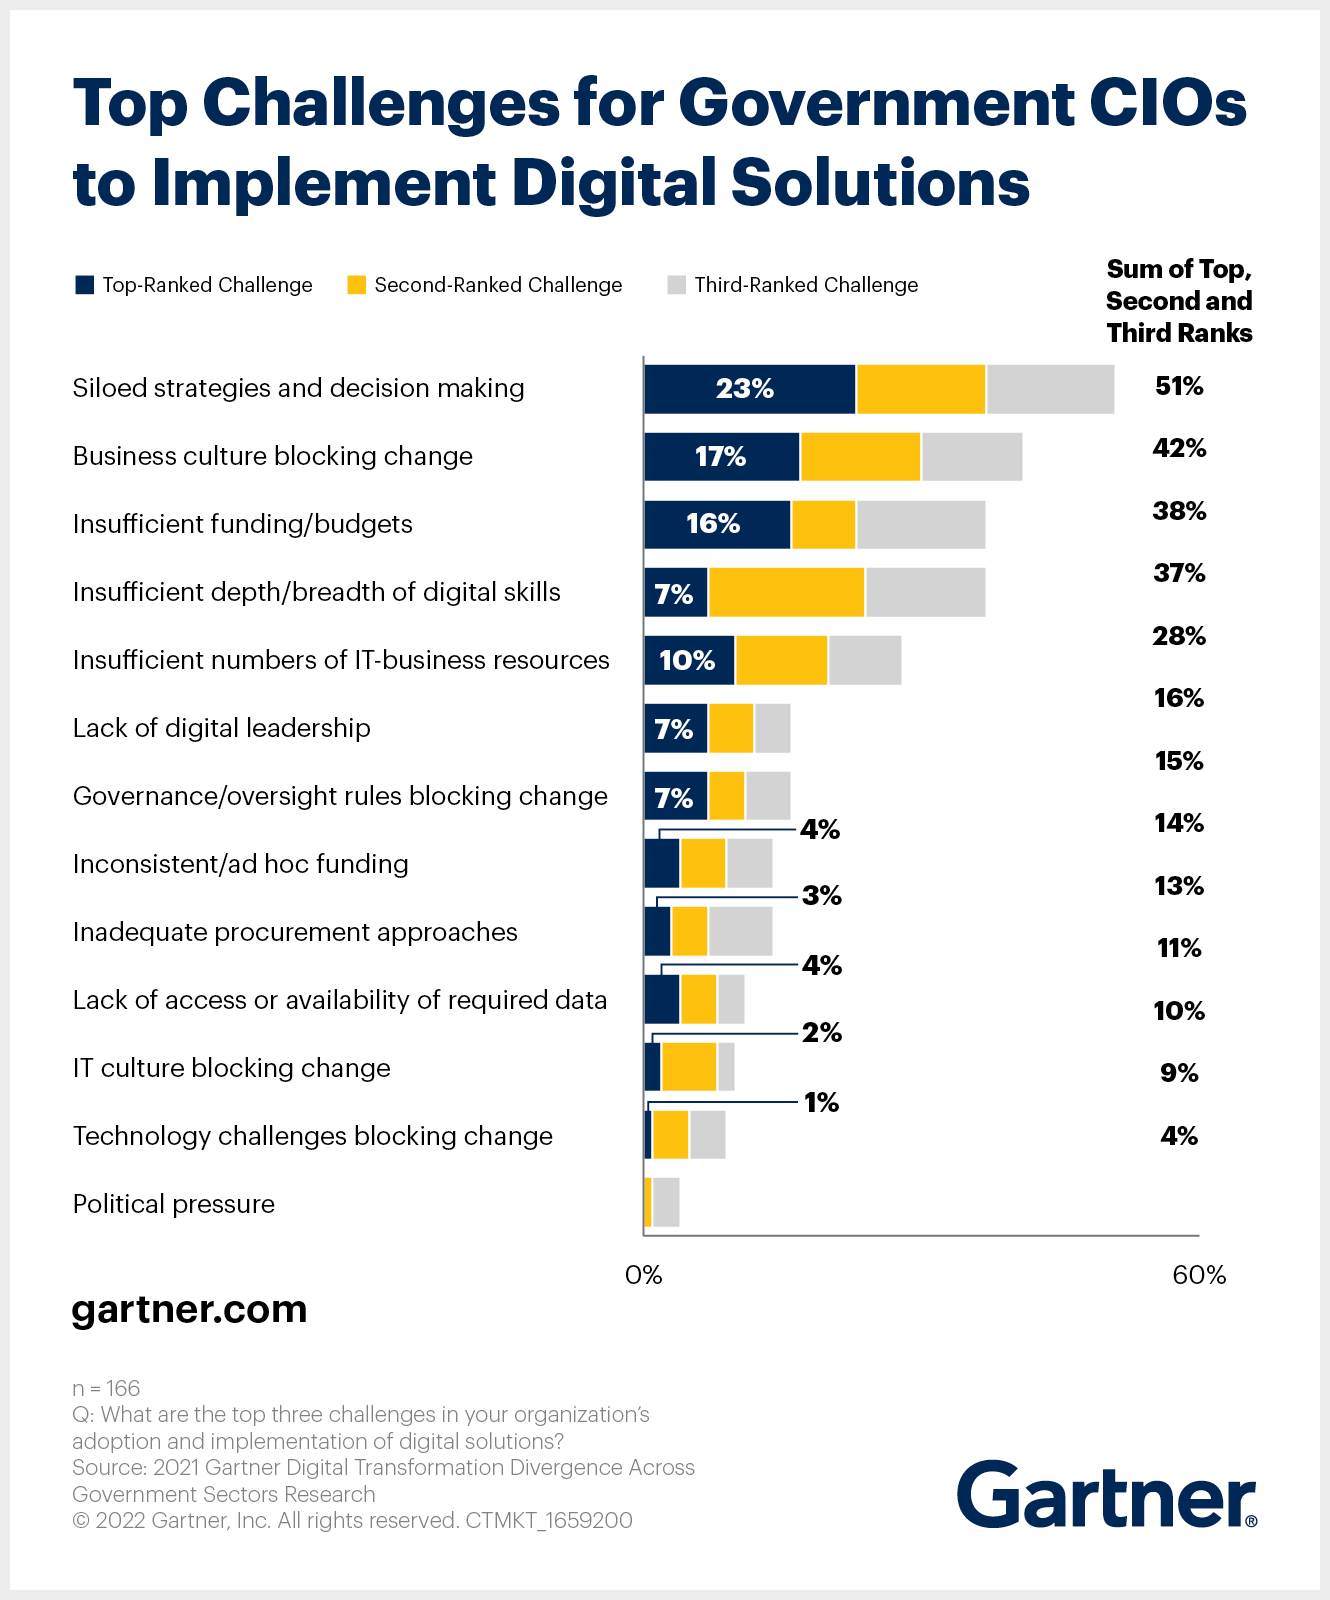 Top Challenges for Government CIOs to Implement Digital Solutions